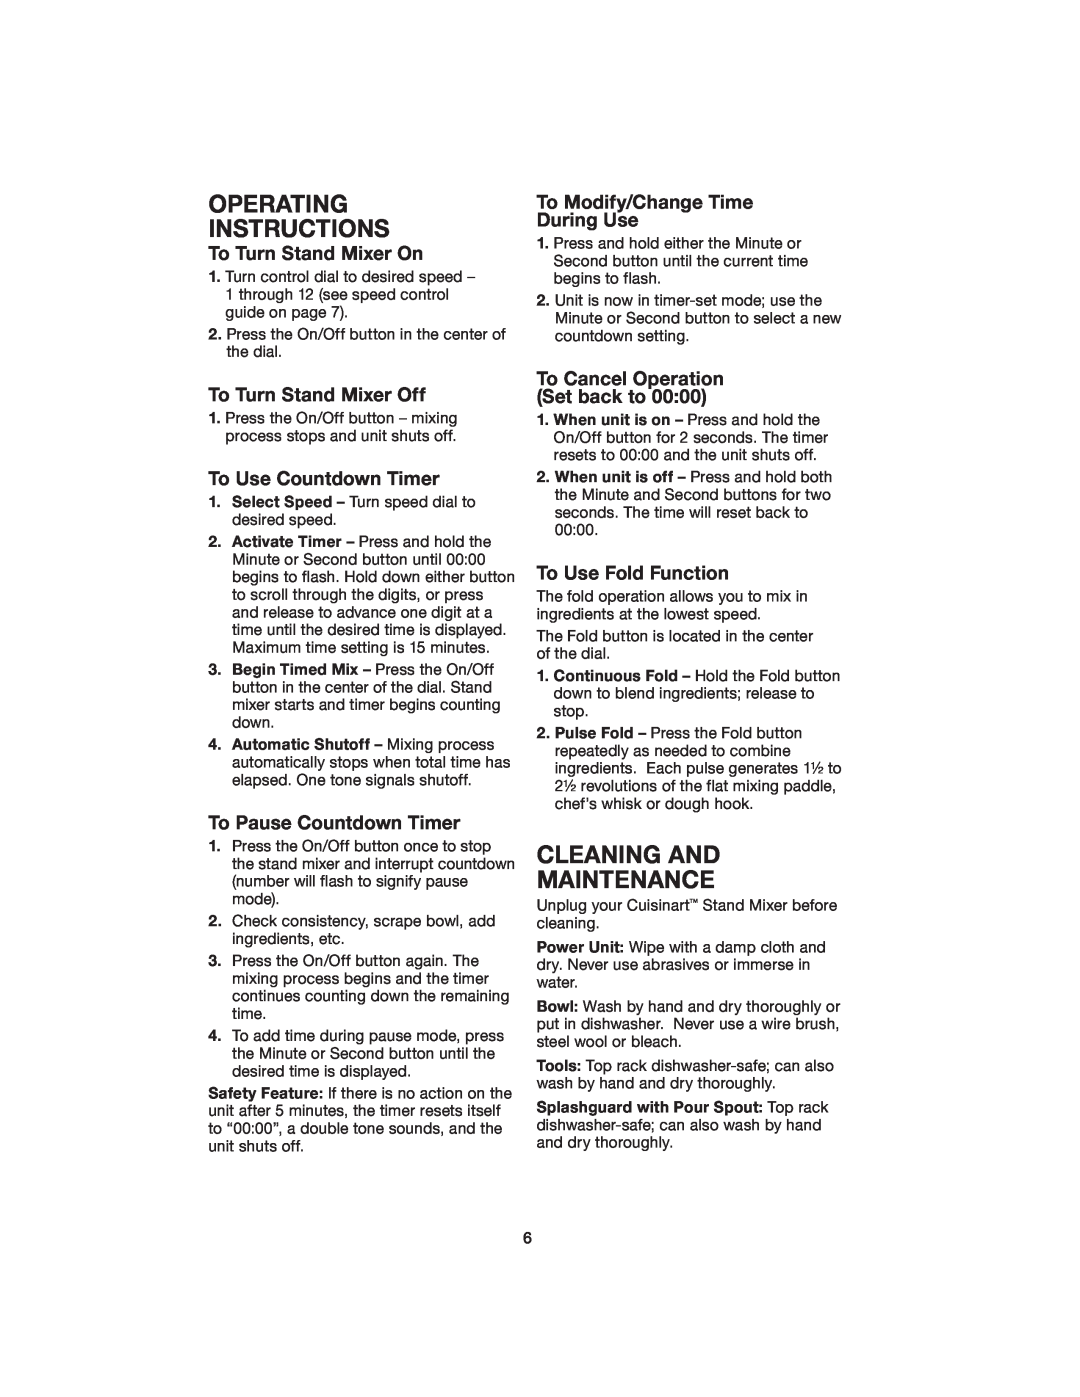 Cuisinart SM-55 Operating Instructions, Cleaning And Maintenance, To Turn Stand Mixer On, To Modify/Change Time During Use 